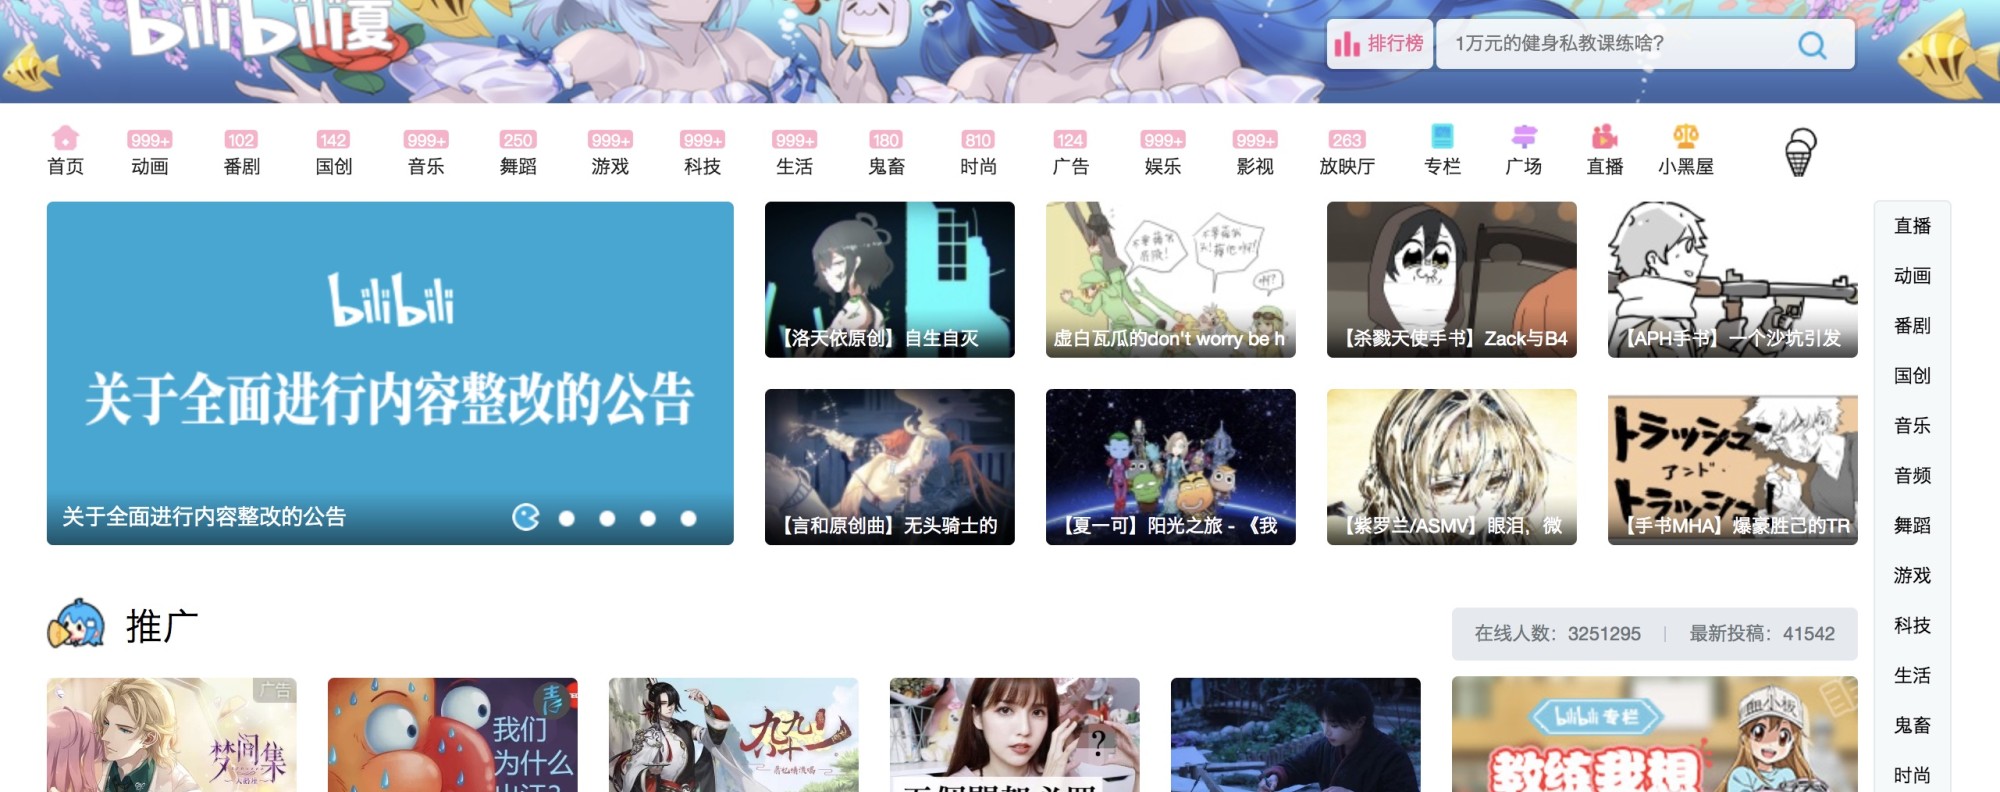 Chinese Video Websites Halt Buying of Japanese Anime | Independent Chinese  PEN Center